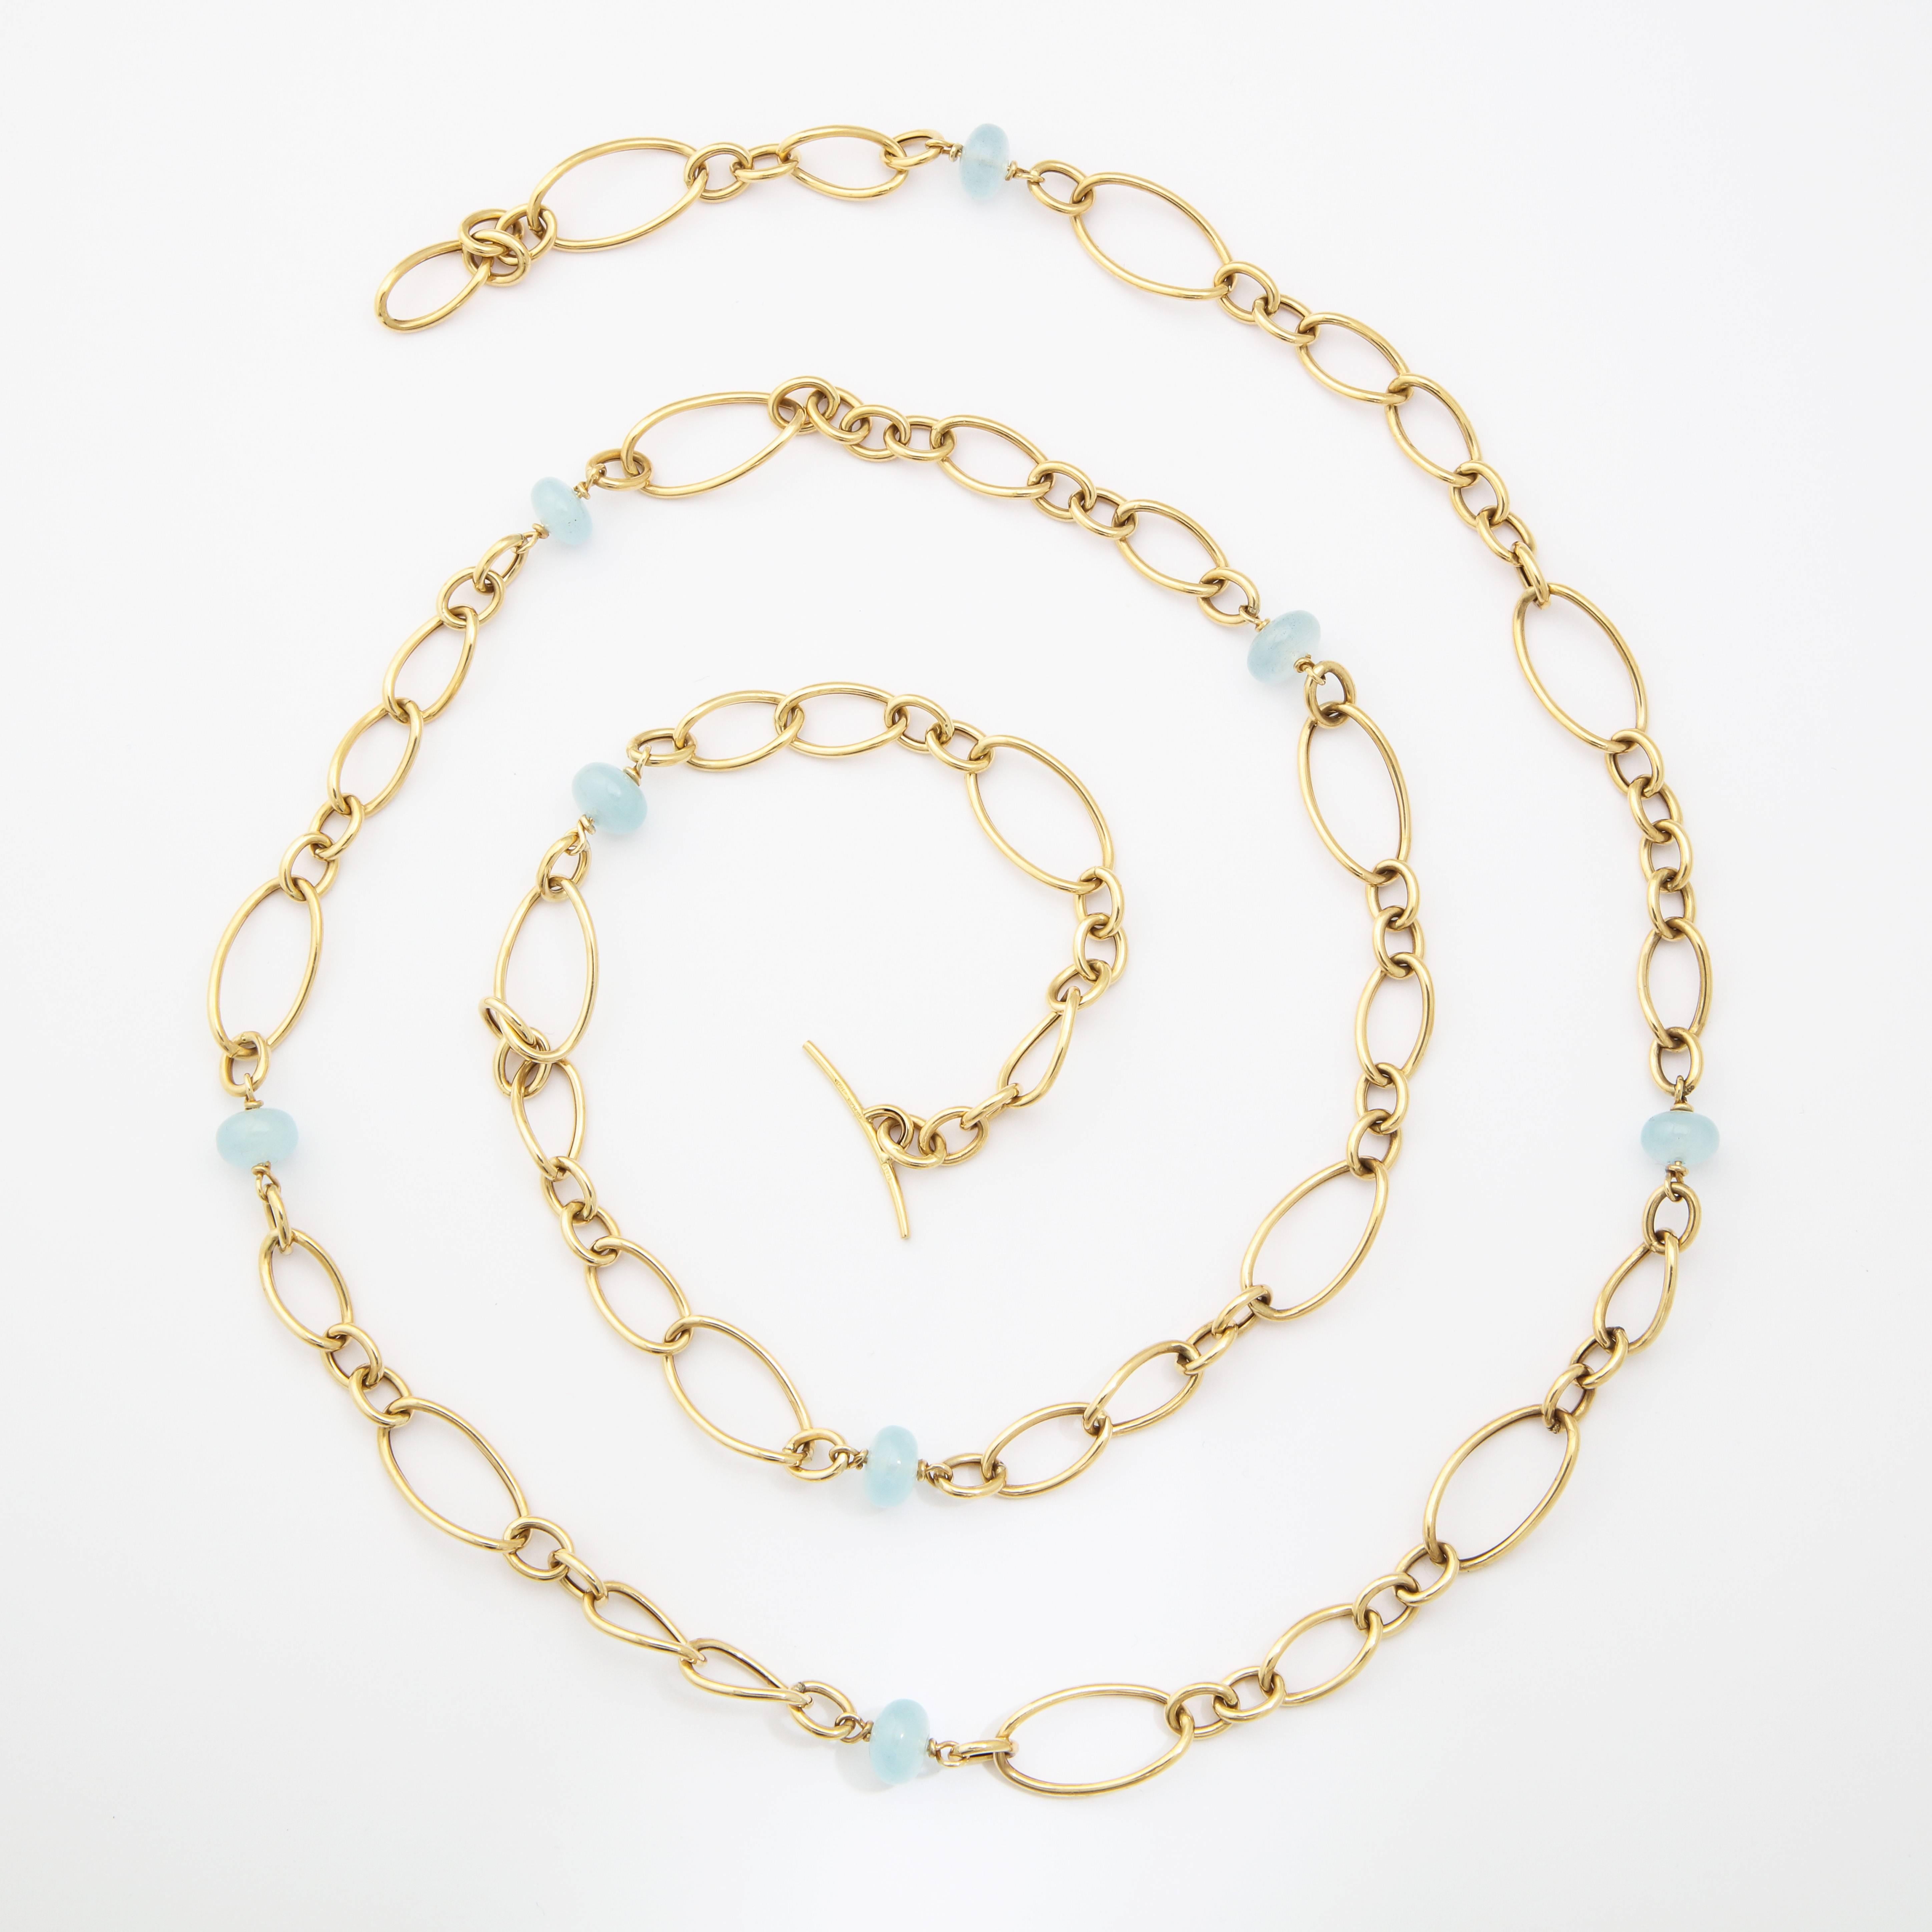 18k yellow gold and aquamarine necklace.